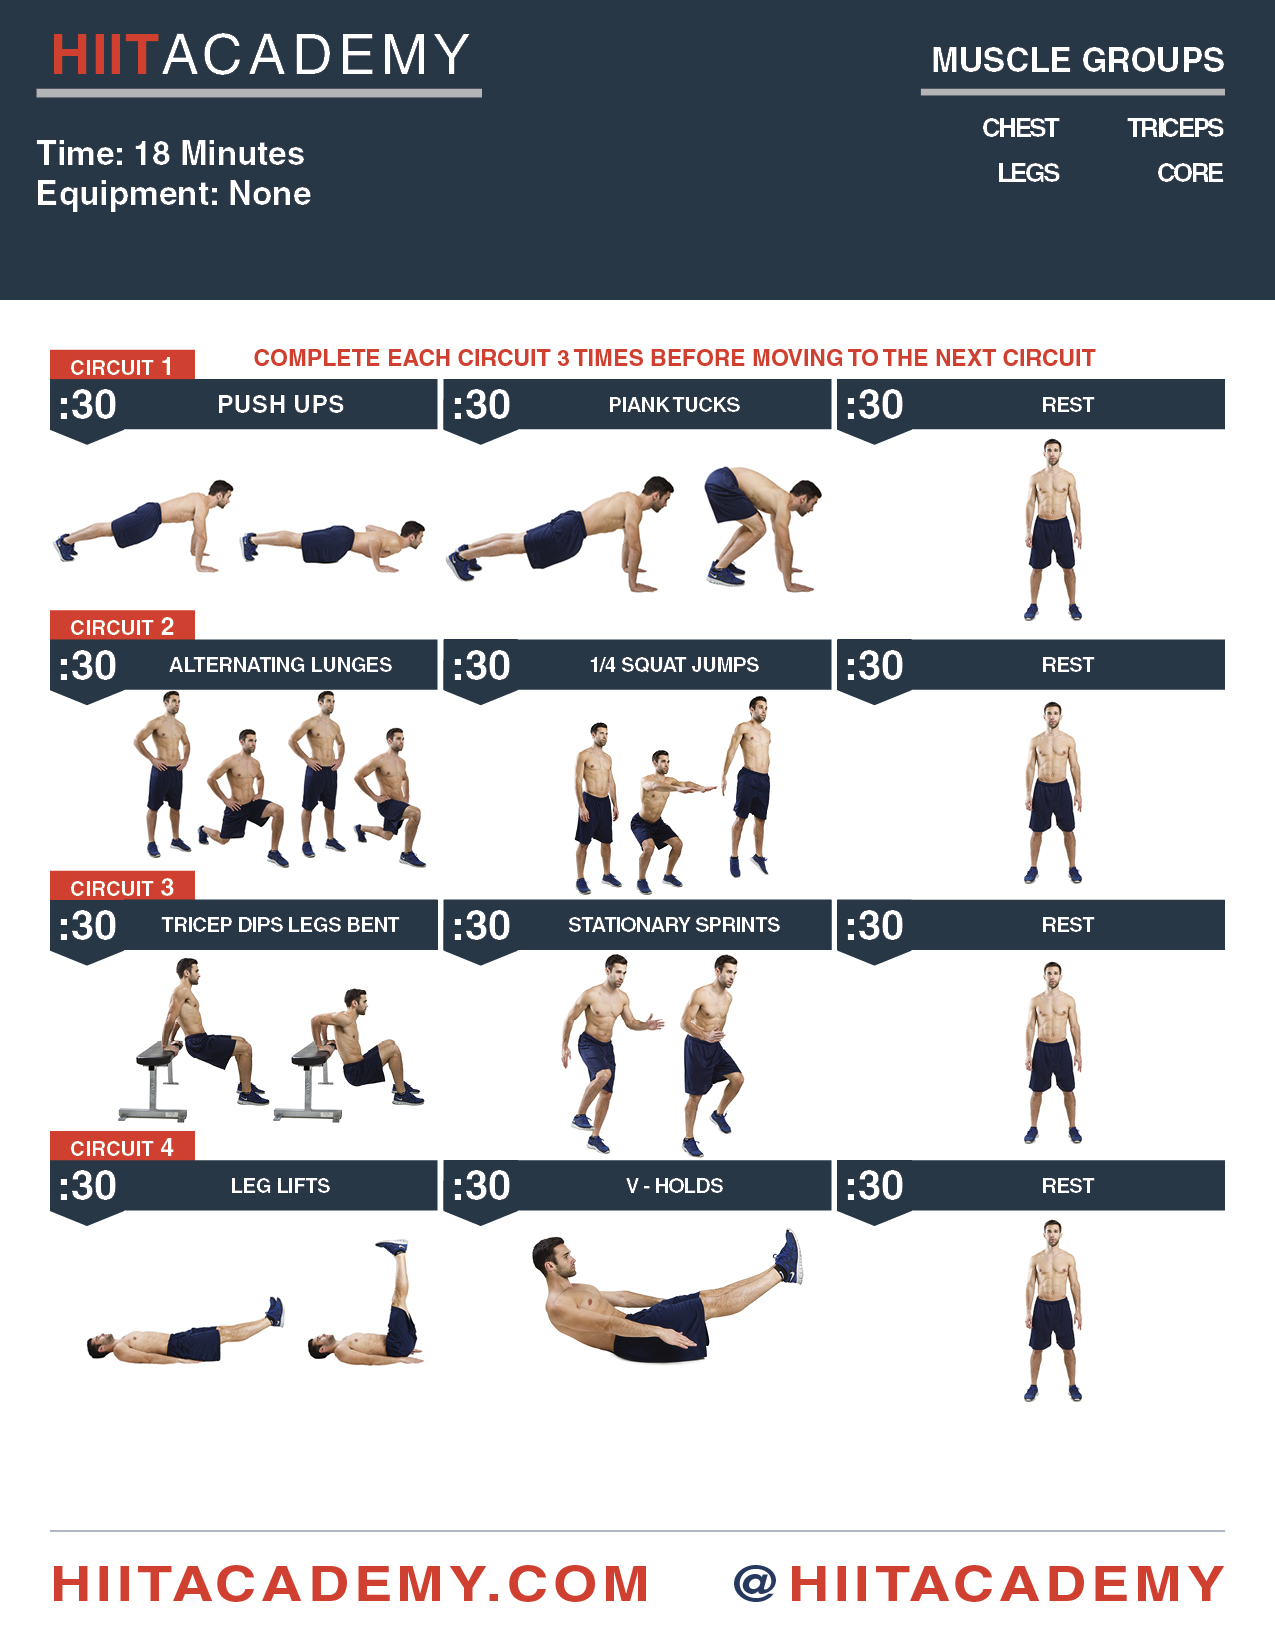 Total Bodyweight Hiit Workout Hiit Academy Hiit Workouts Hiit